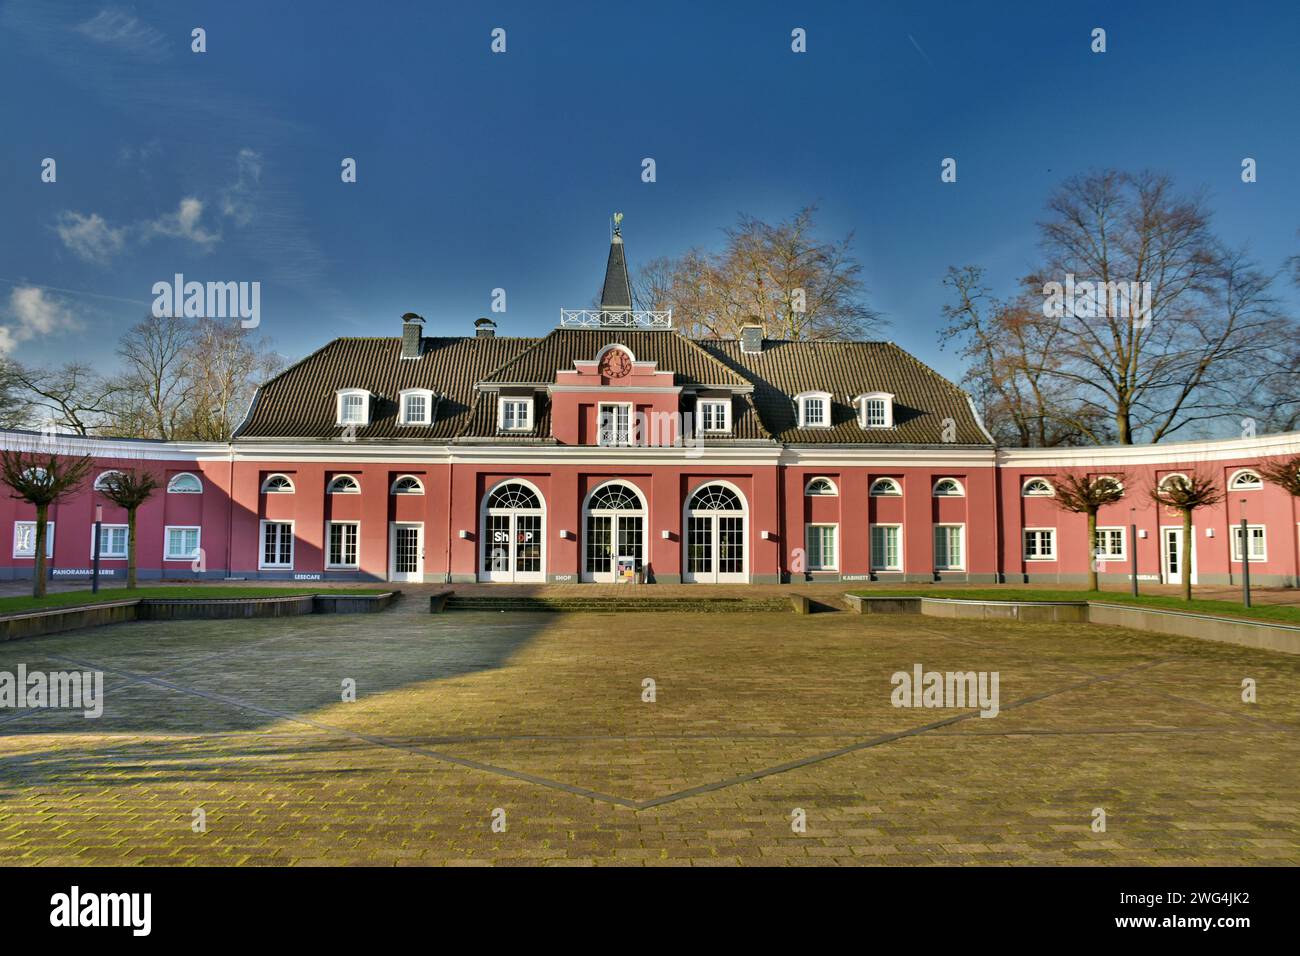 The Ludwiggalerie Schloss Oberhausen is an art museum in Oberhausen. The gallery is located in the Kaisergarten within walking distance of the Gasomet Stock Photo